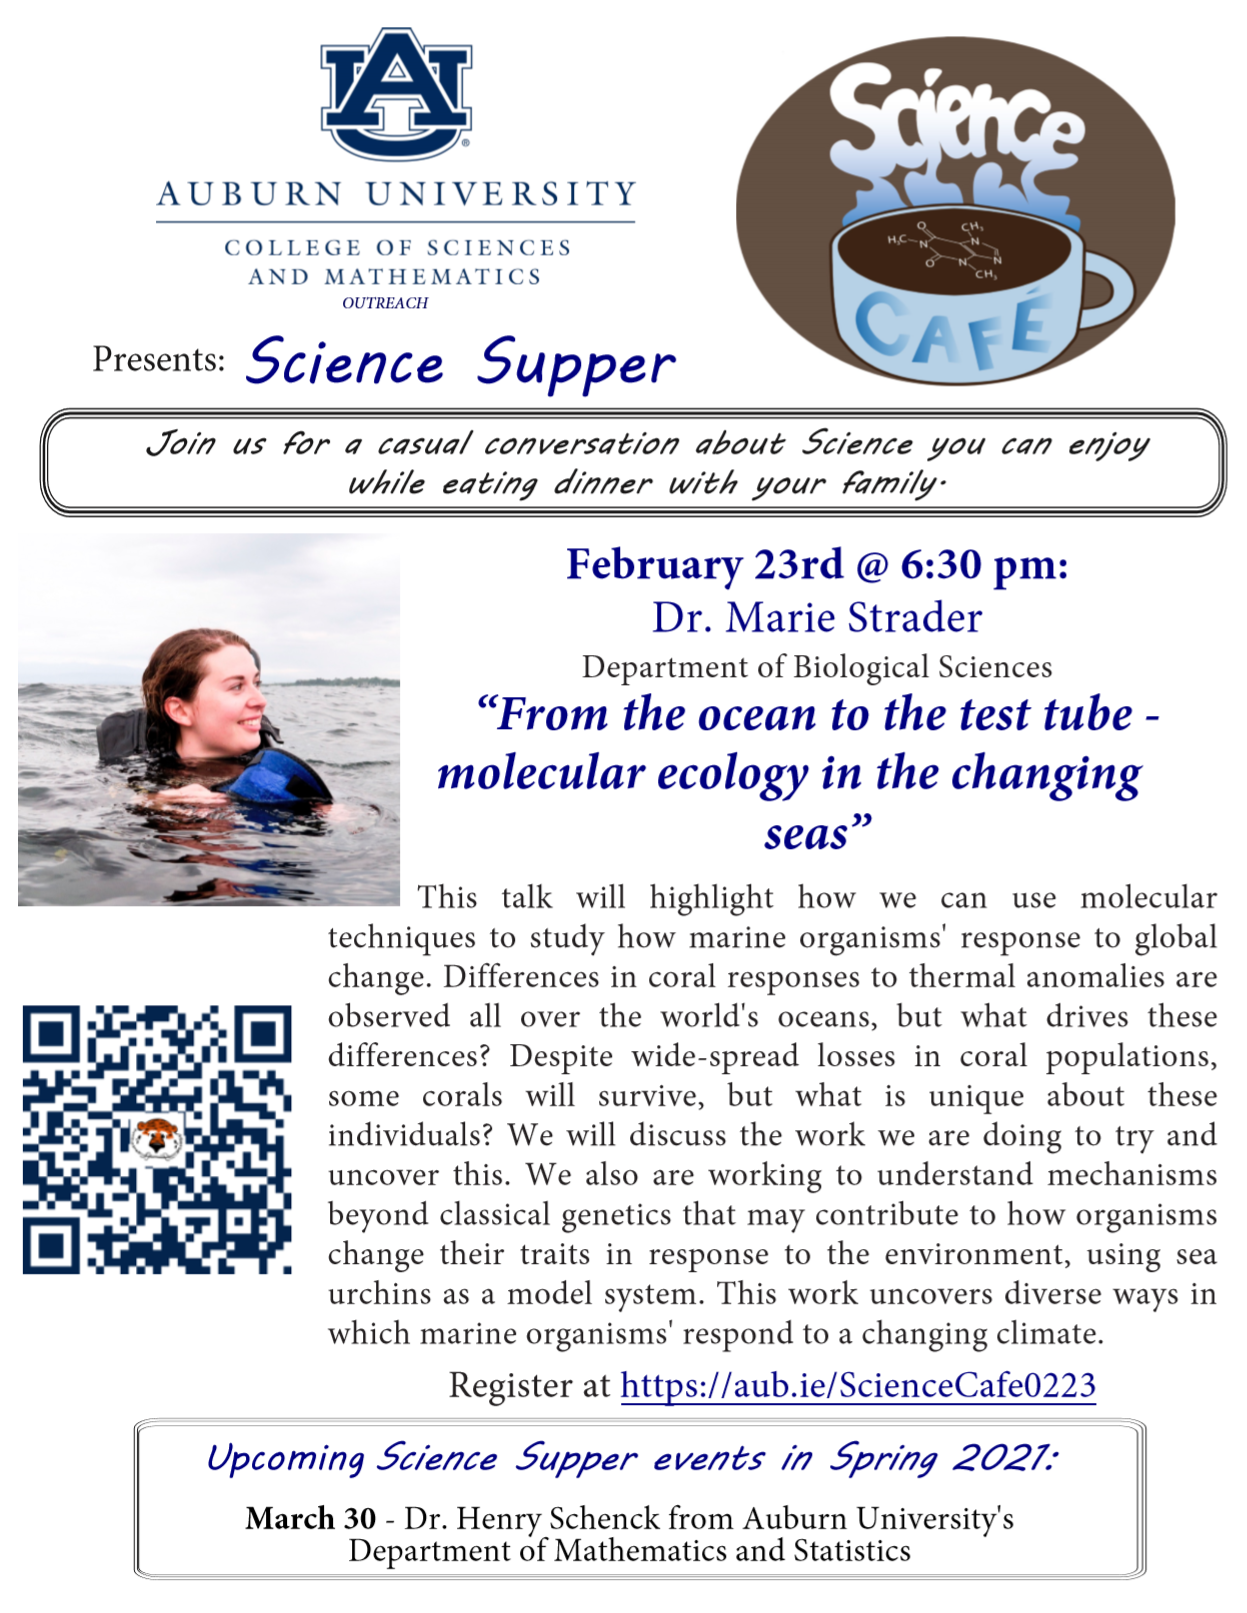 Marie Strader will speak at the February 23 Science Supper.